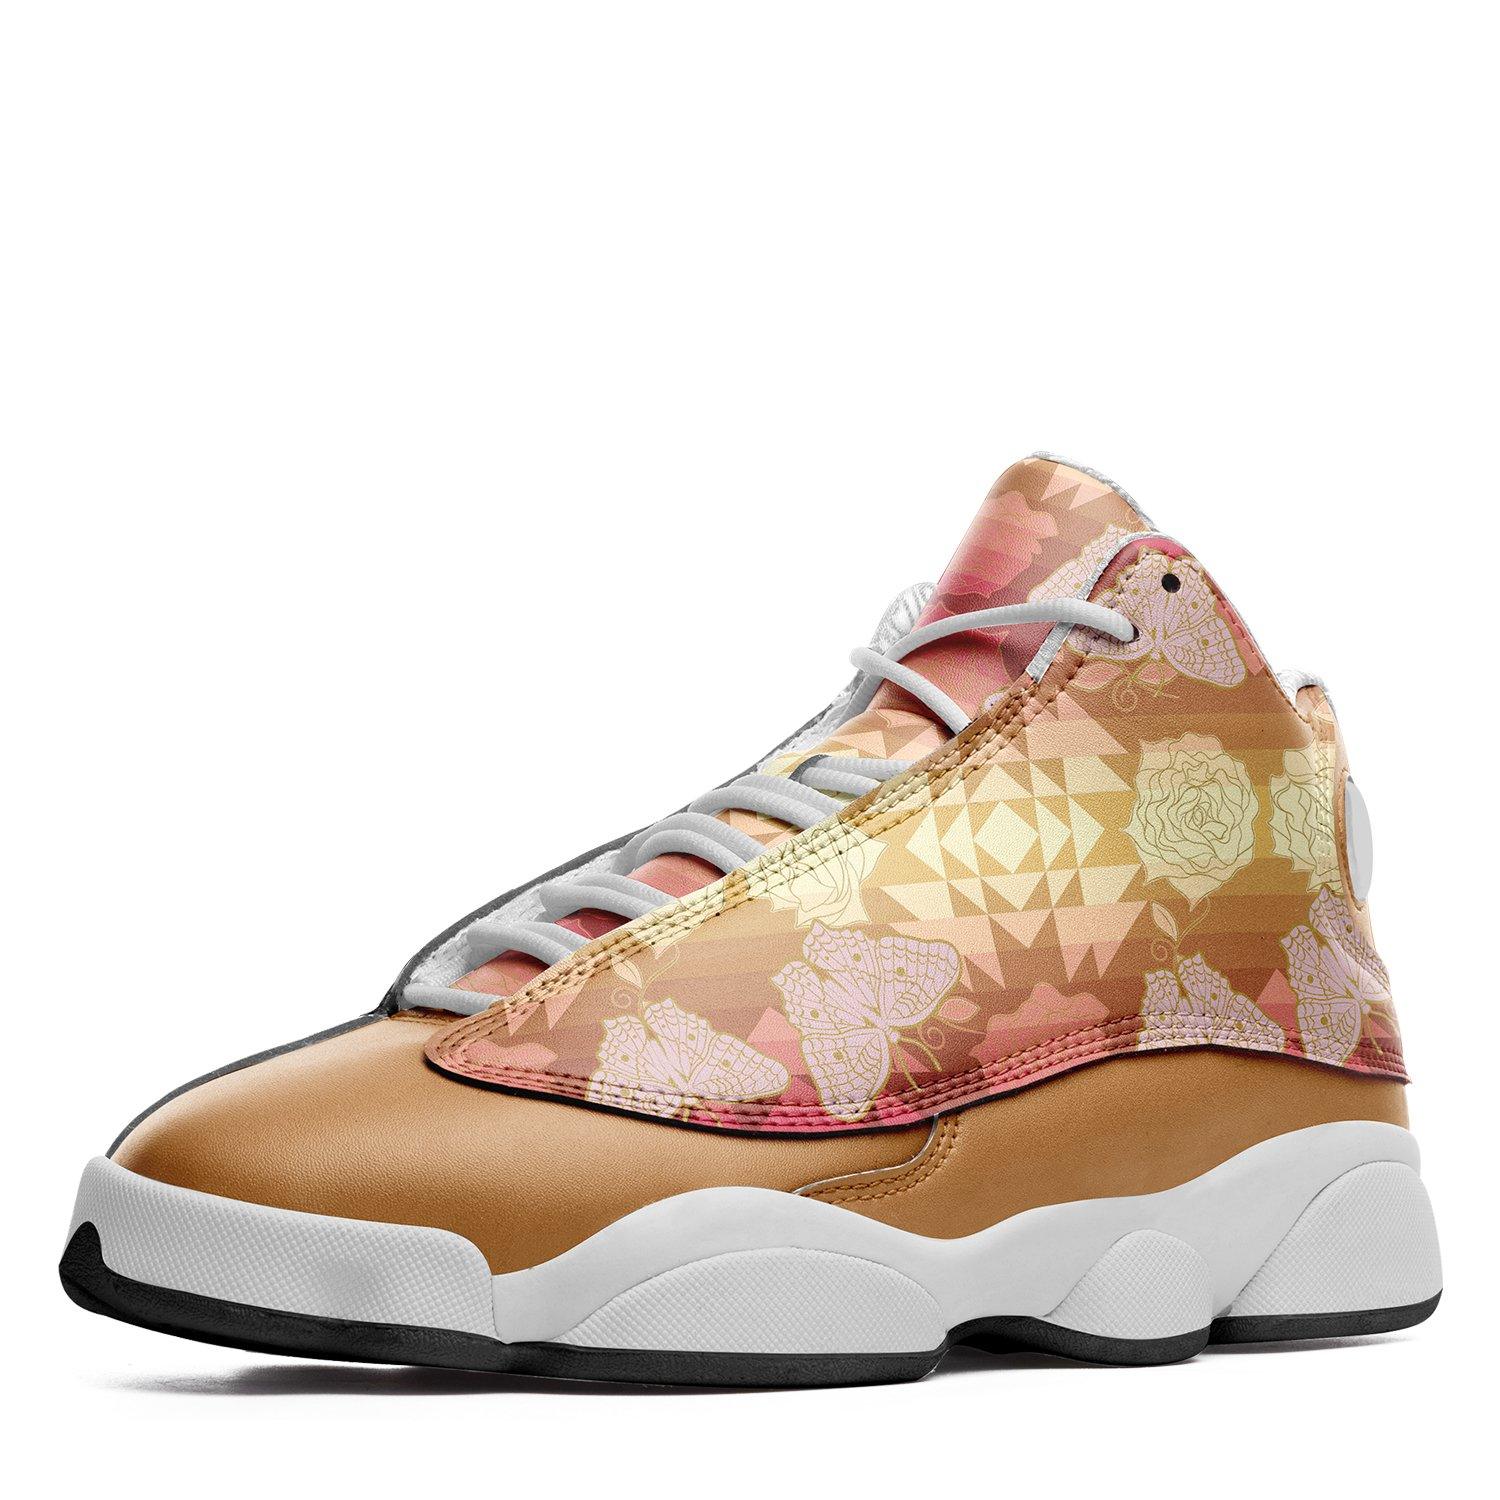 Butterfly and Roses on Geometric Isstsokini Athletic Shoes Herman 